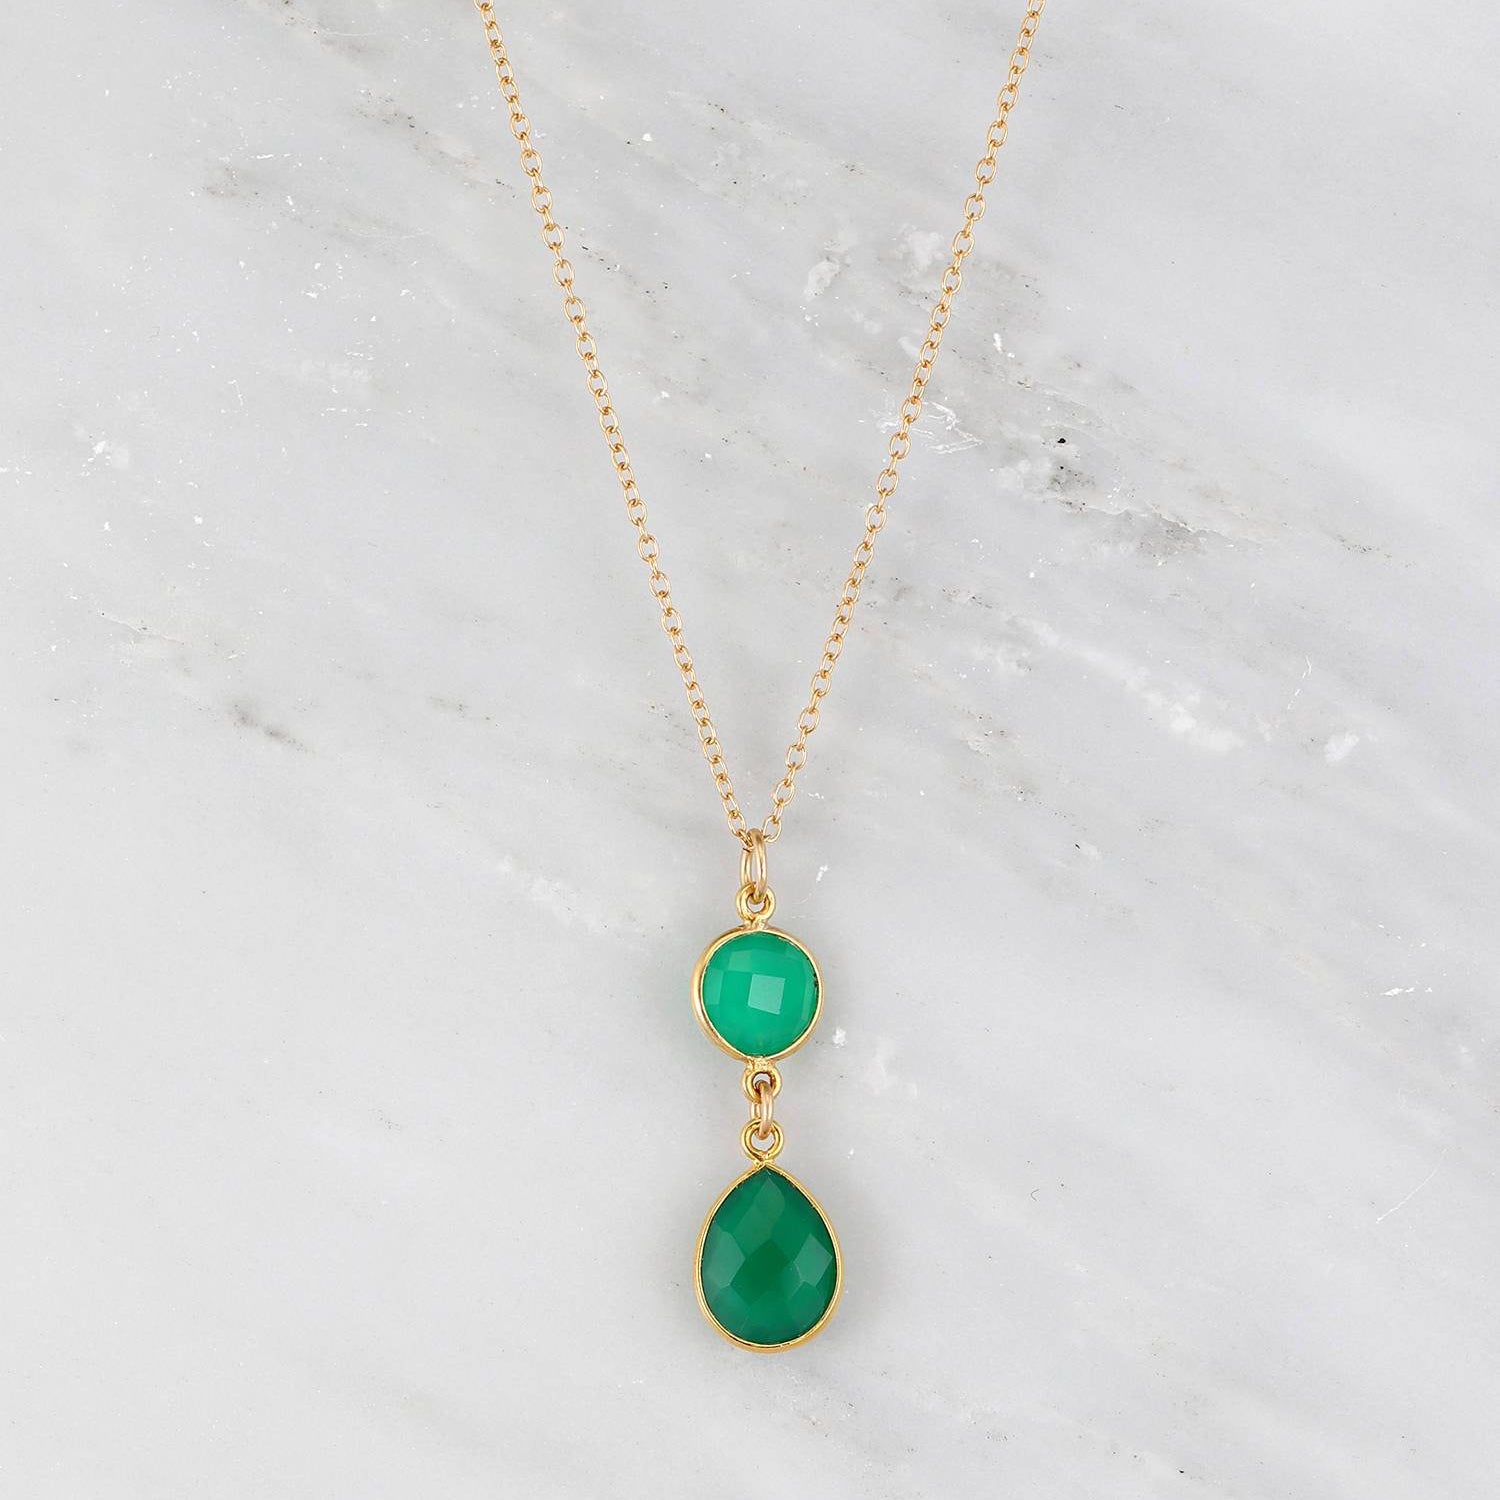 Green Onyx drop Necklace, Green stone Necklace, Onyx Jewelry, Gold Filled Necklace, Two Tier Necklace, Gift for Bridesmaids, Wedding Gift